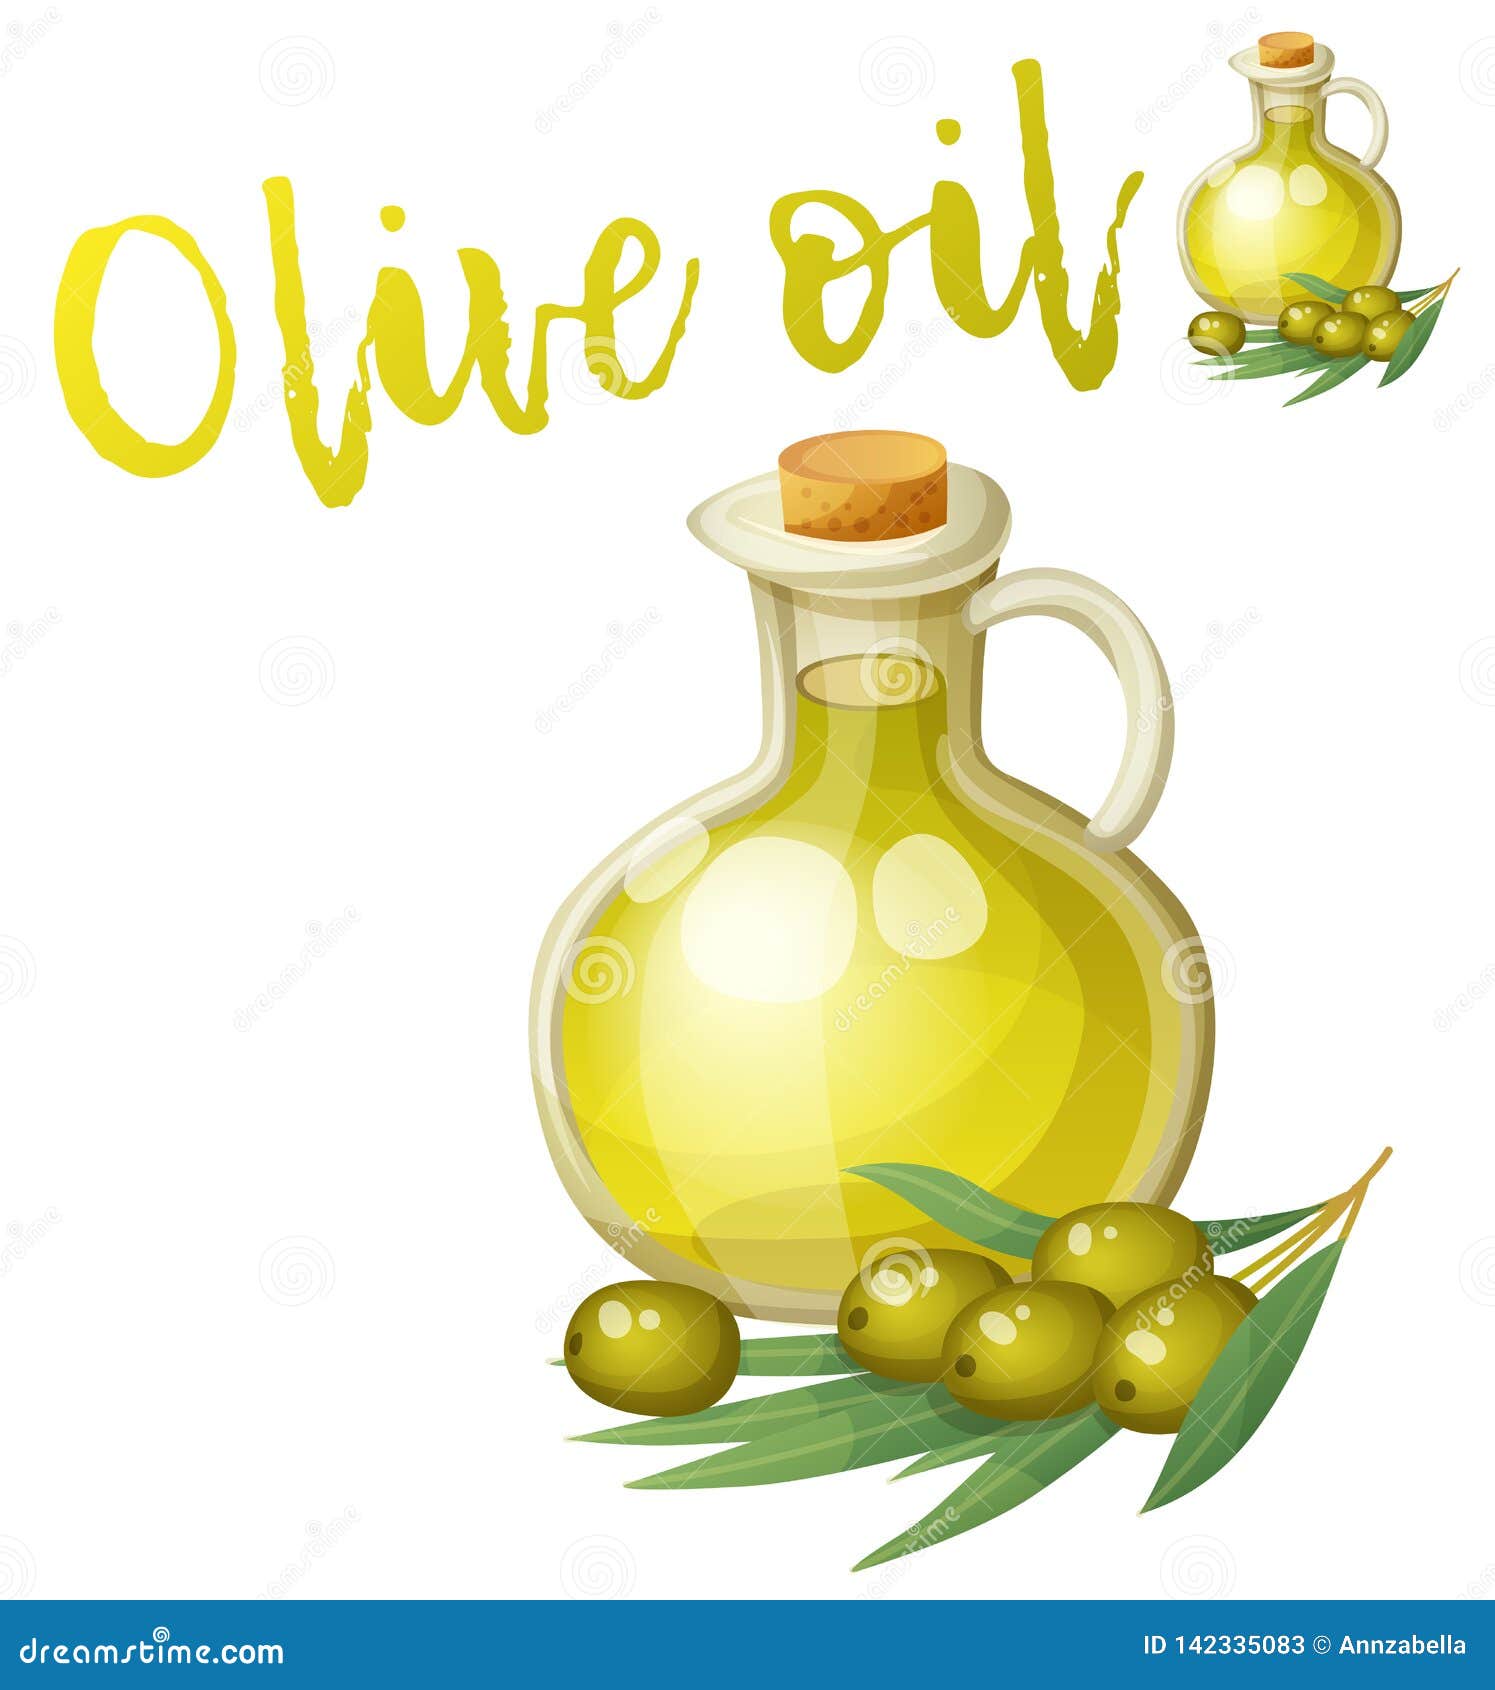 A Bottle of Olive Oil a carton